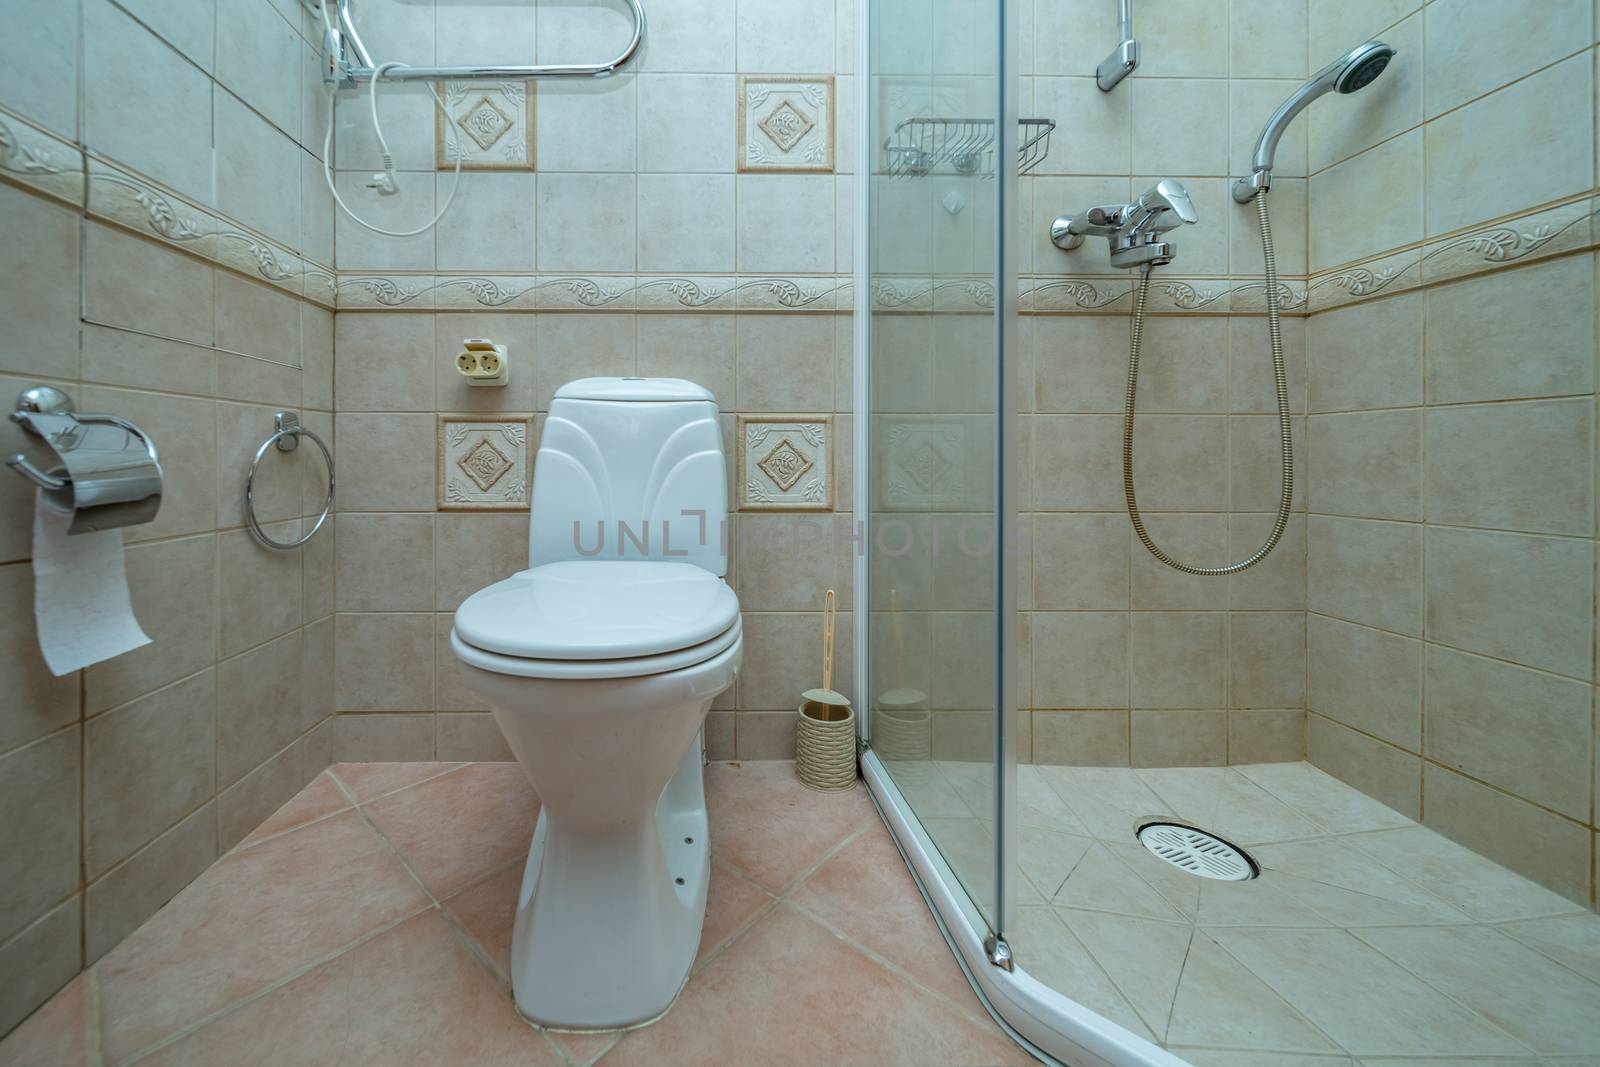 Toilet bowl in small bathroom with shower Room with brown tile decoration